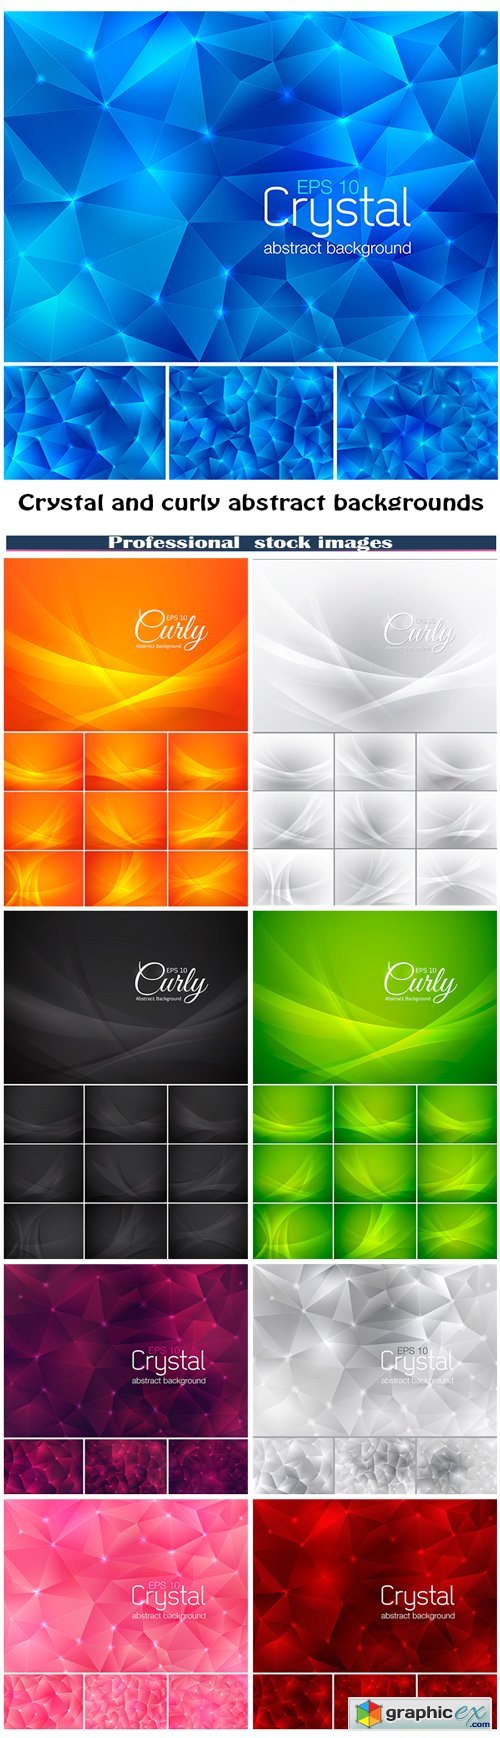 Crystal and curly abstract backgrounds